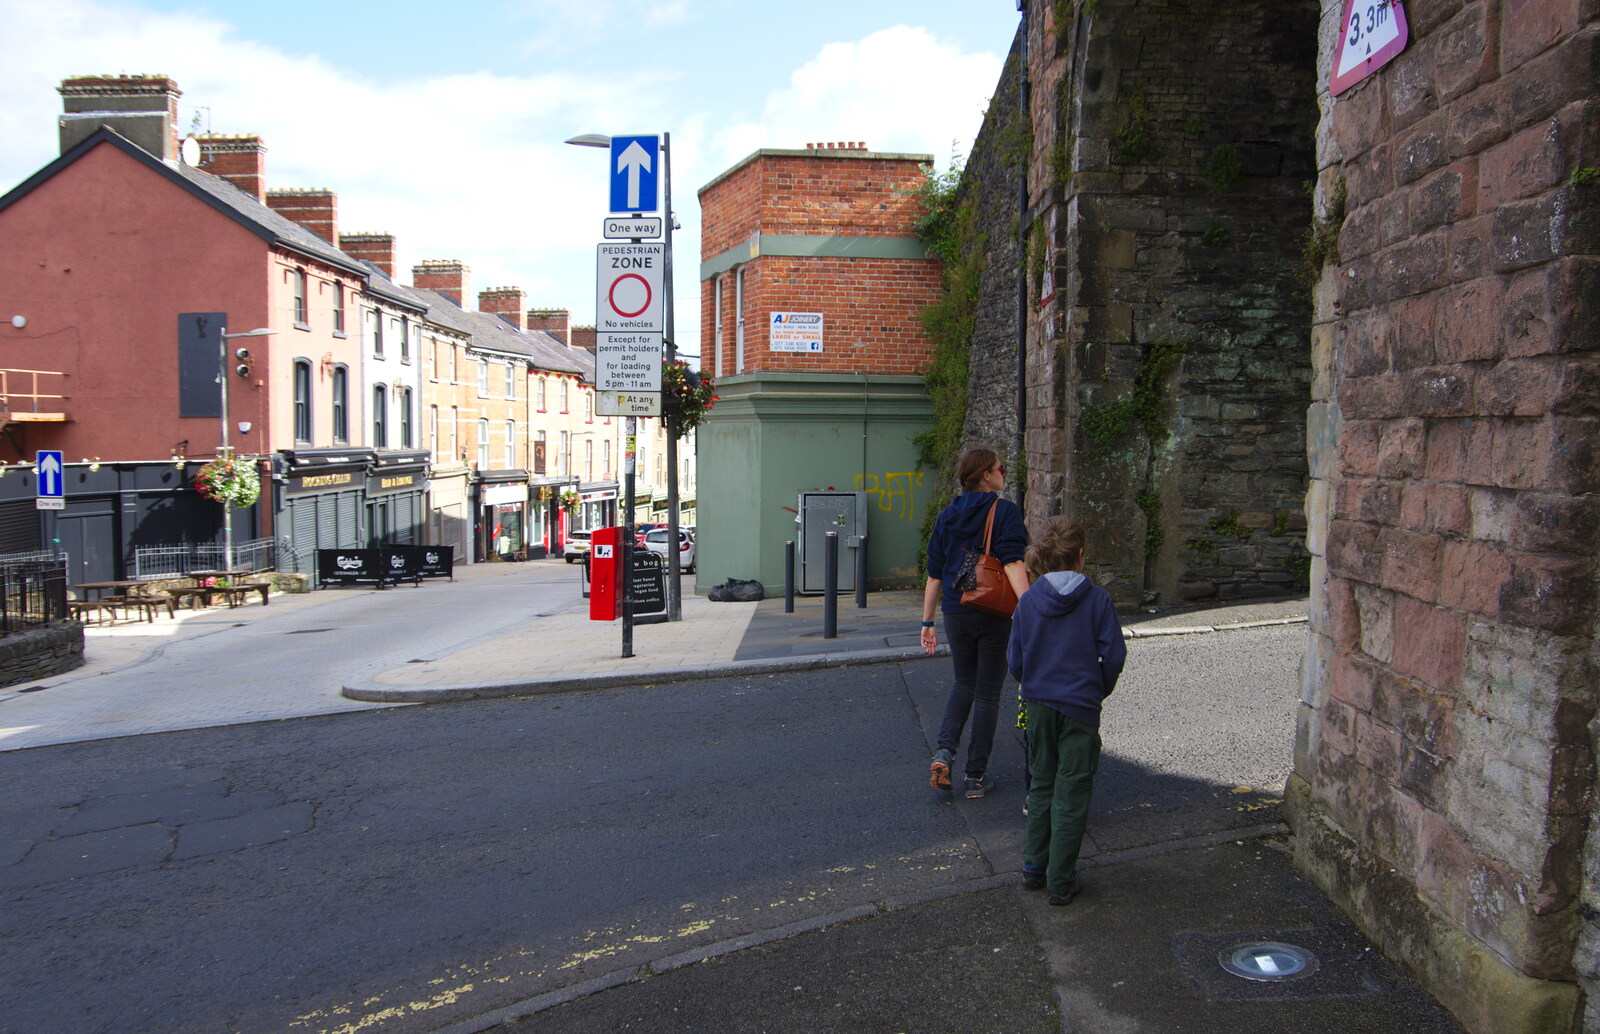 We enter the old city walls at Butcher Gate from A Day in Derry, County Londonderry, Northern Ireland - 15th August 2019